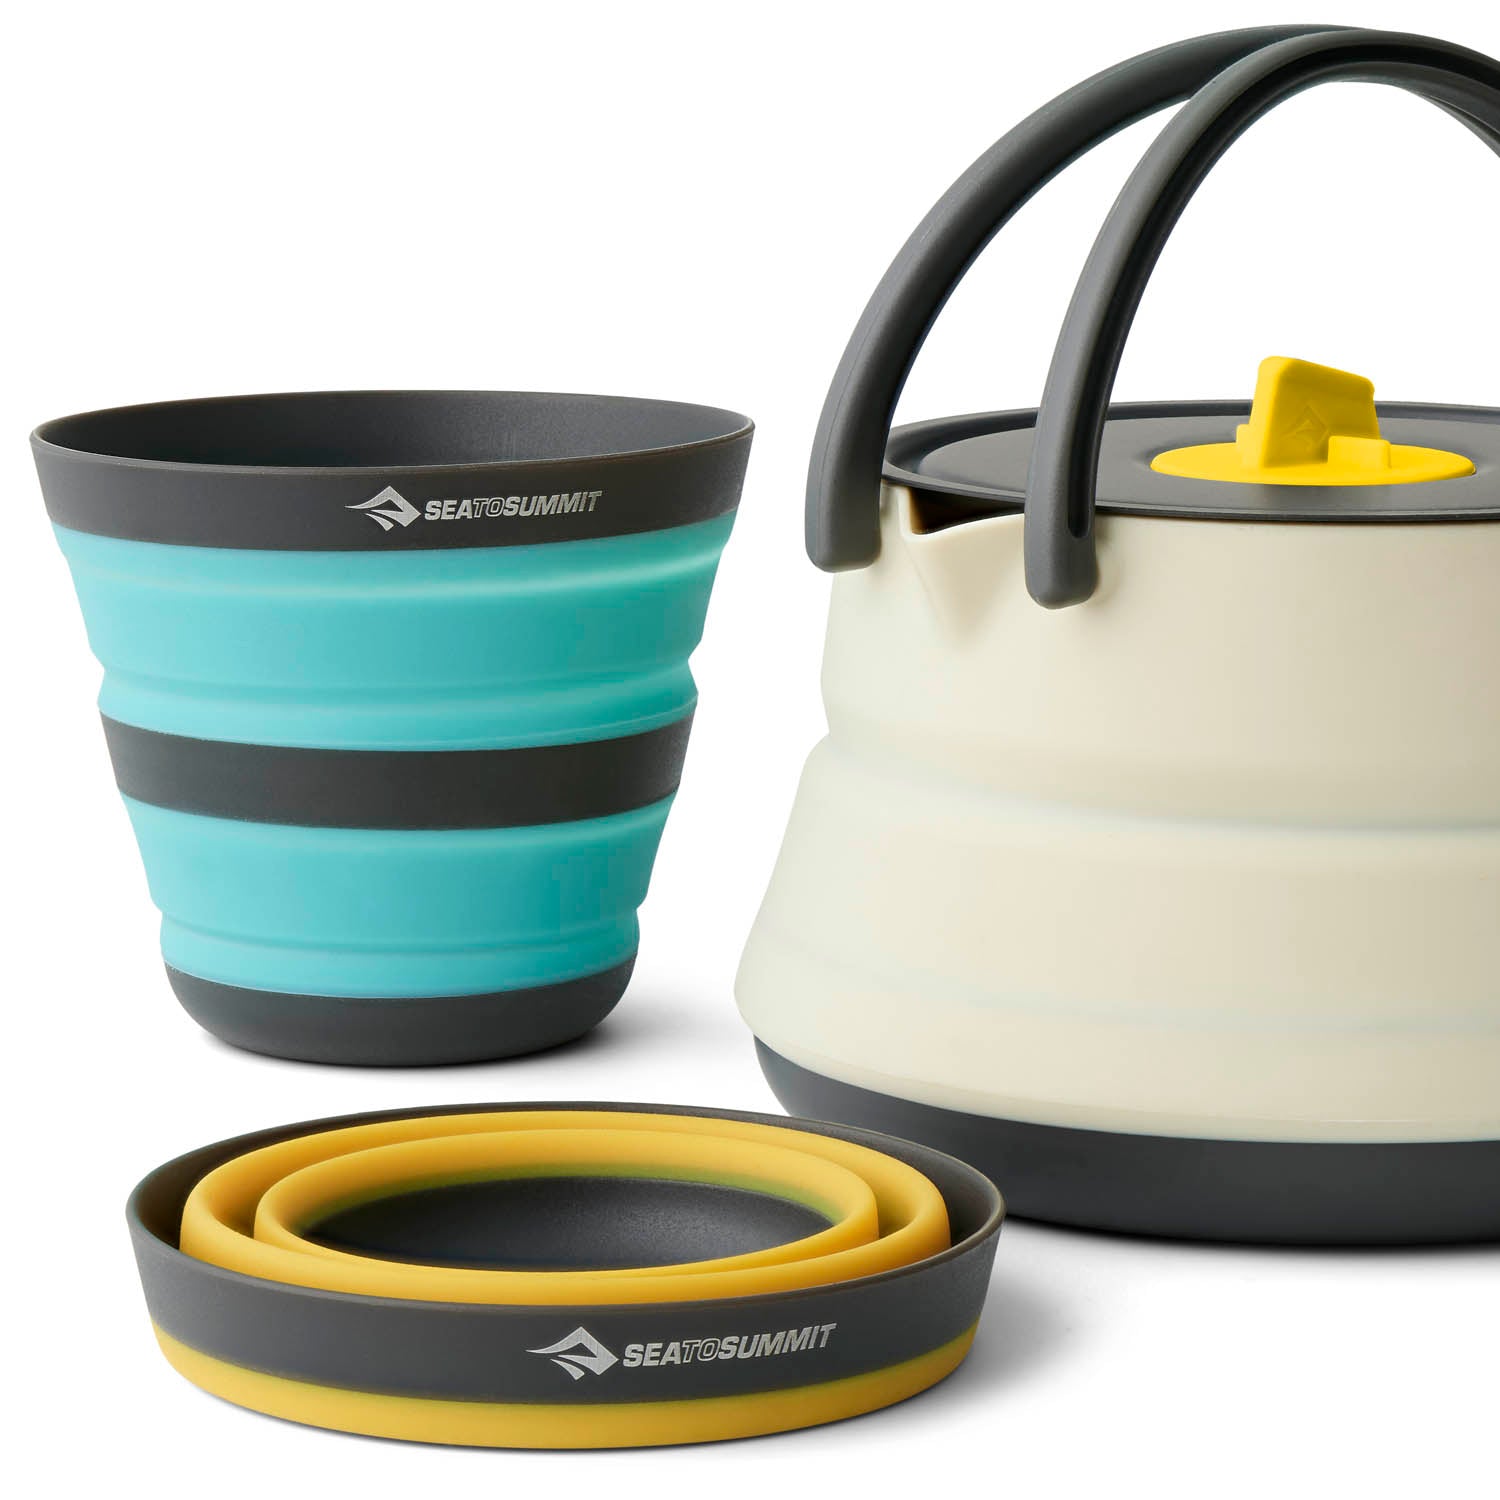 Frontier Ultralight Collapsible Kettle Cook Set - [3 Piece] 1.1L with Cups